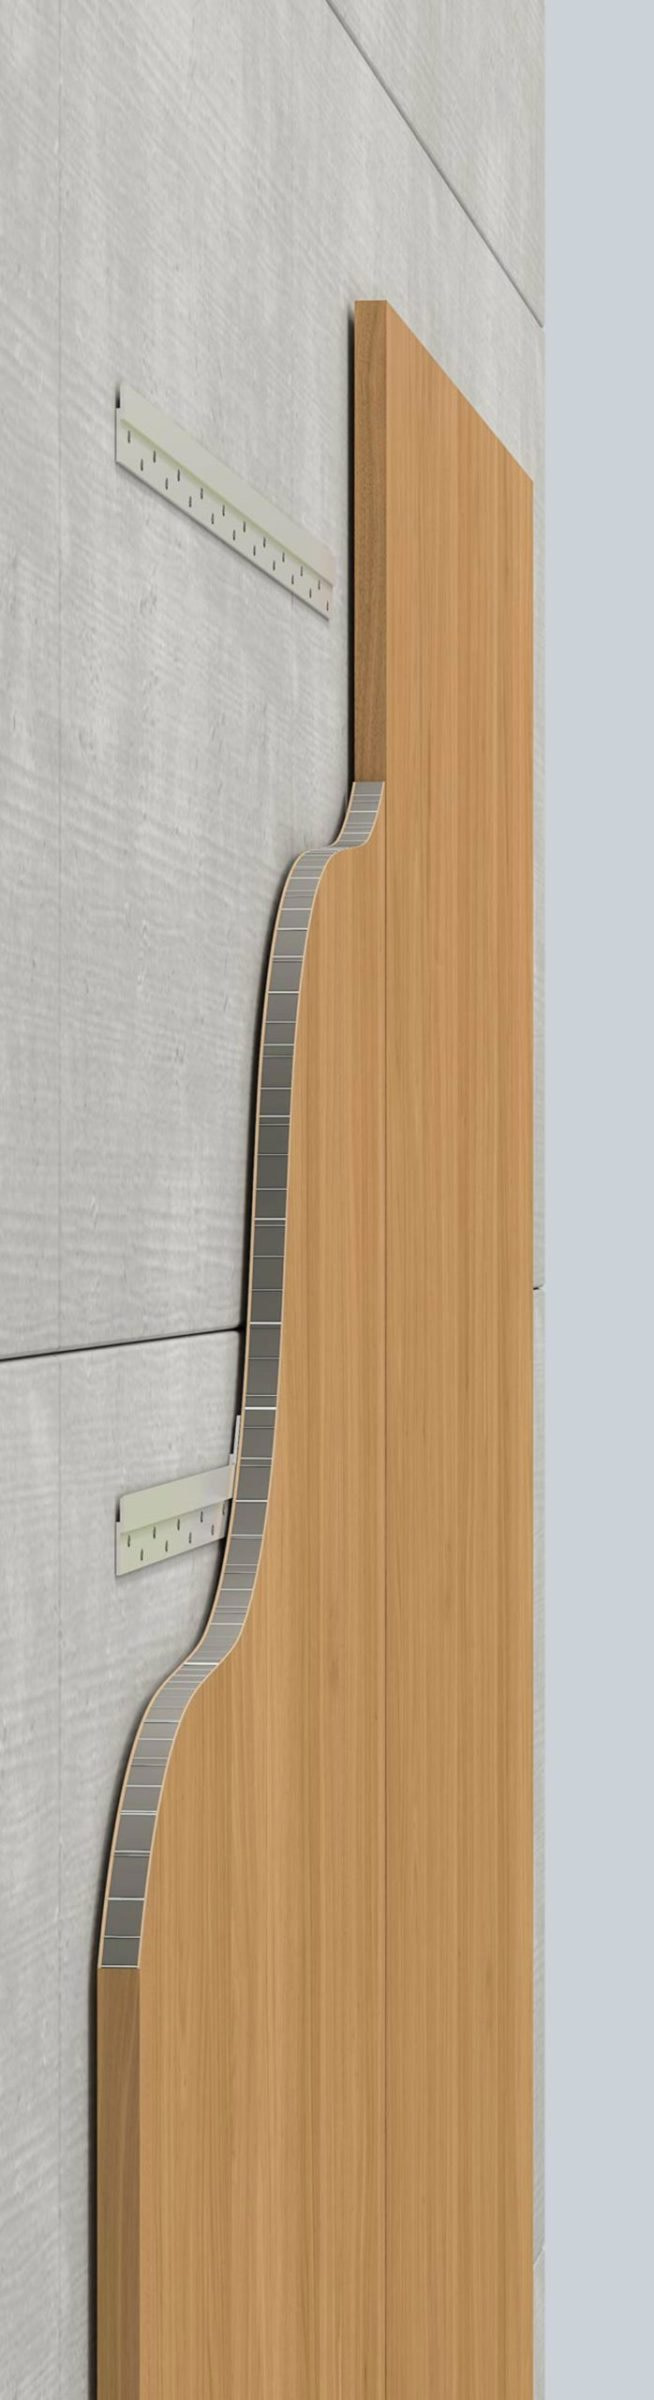 Profile view of a SoundPly acoustic wood panel